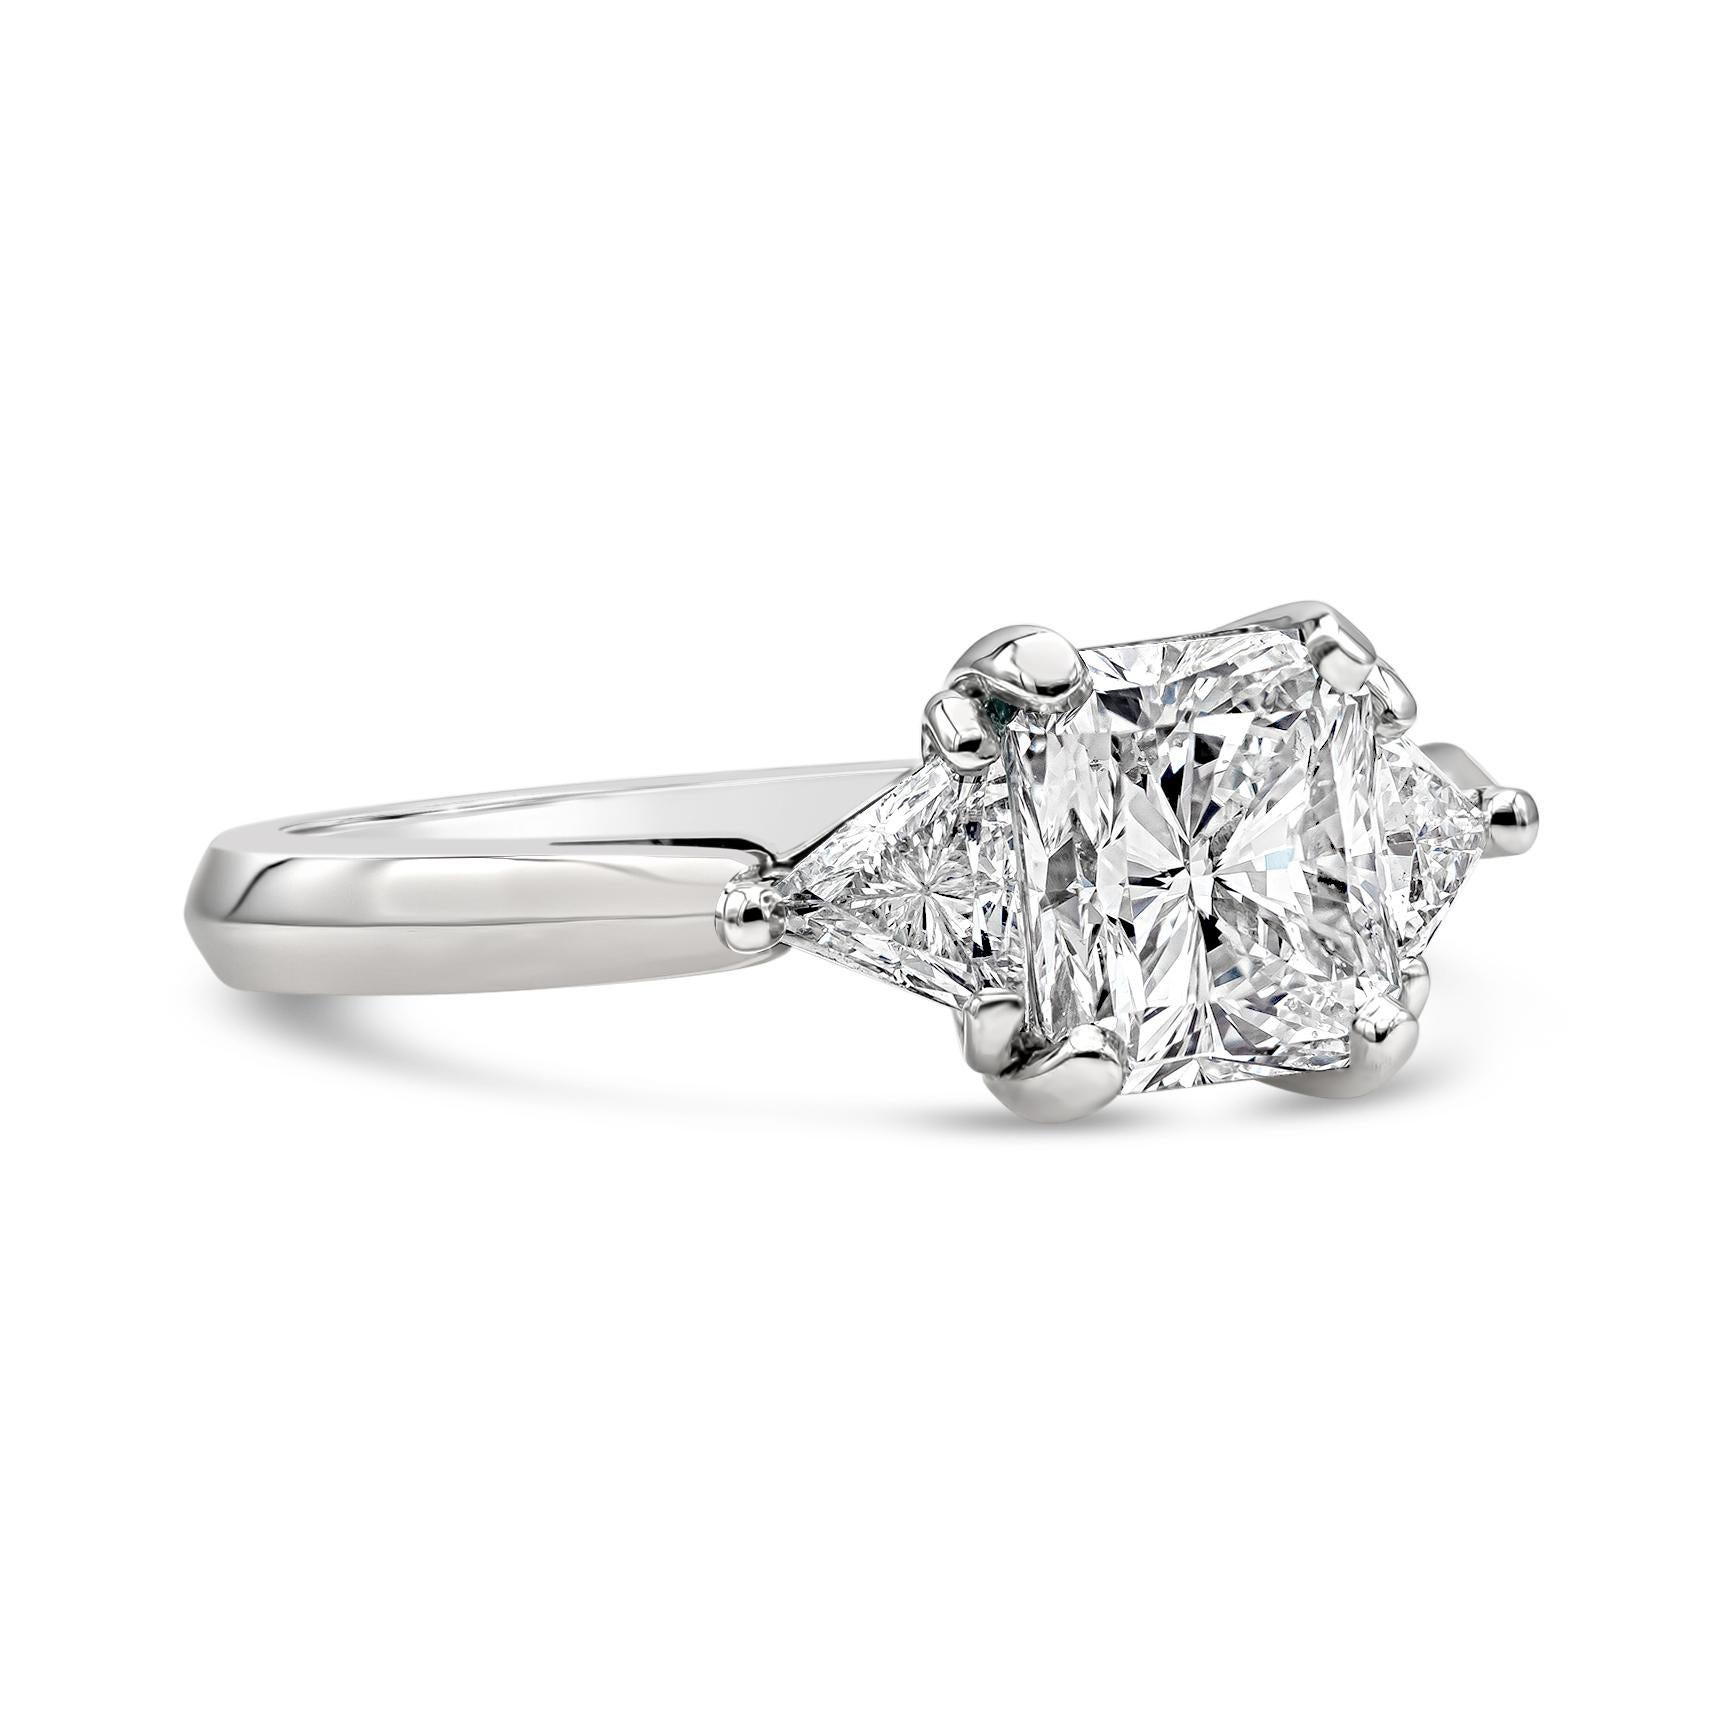 A classic three-stone engagement ring style showcasing a 1.50 carats radiant cut diamond certified by GIA as F color and SI1 in clarity, flanked by two trillion cut diamonds on either side weighing 0.47 carats total. Made in polished platinum. Size